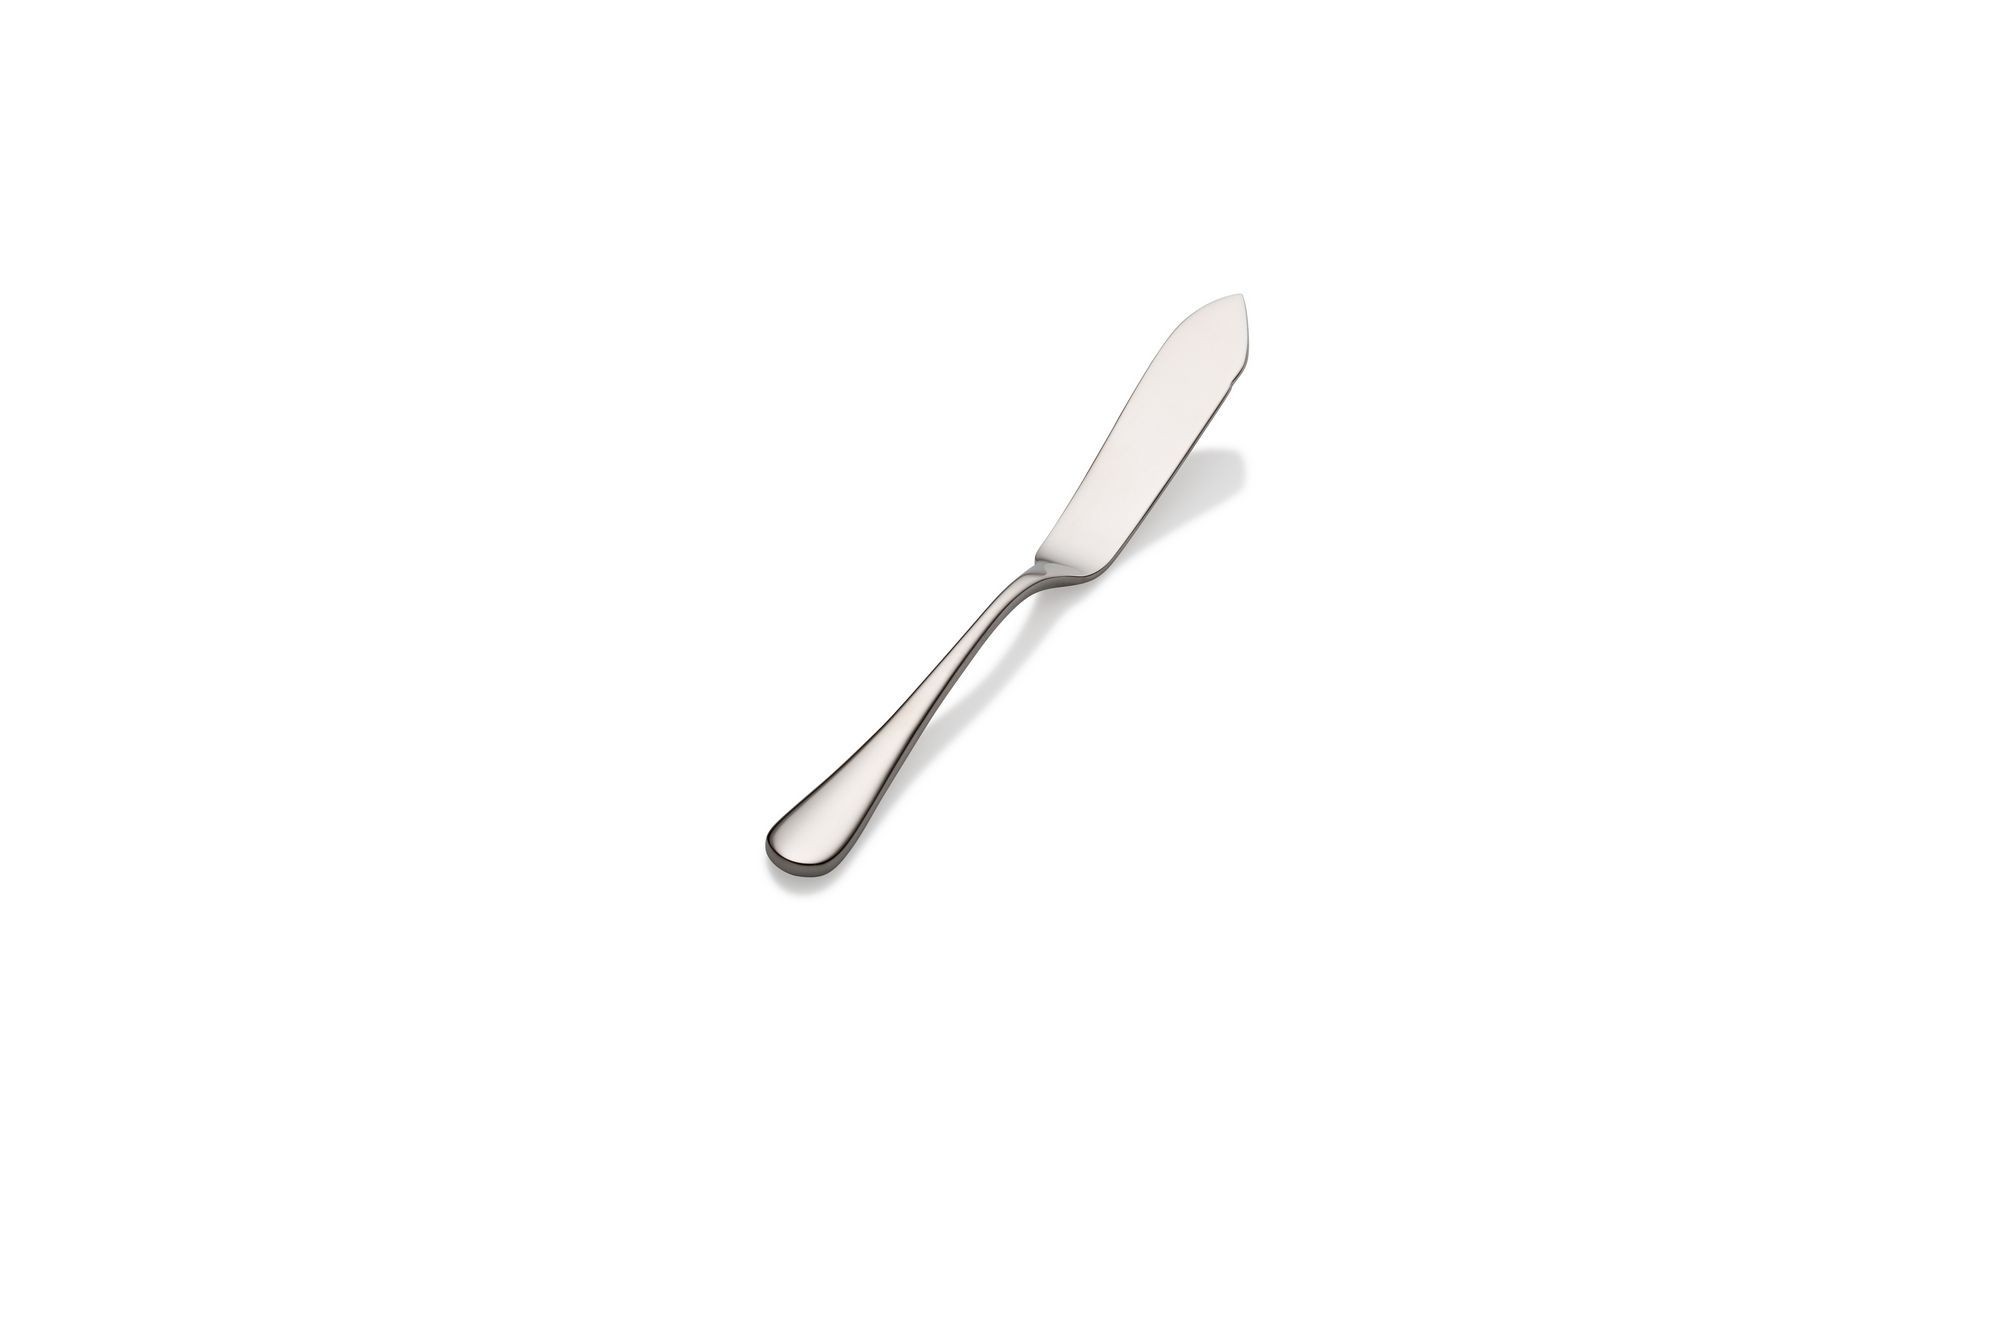 Bon Chef S4010S Como 18/8 Stainless Steel  Butter Knife